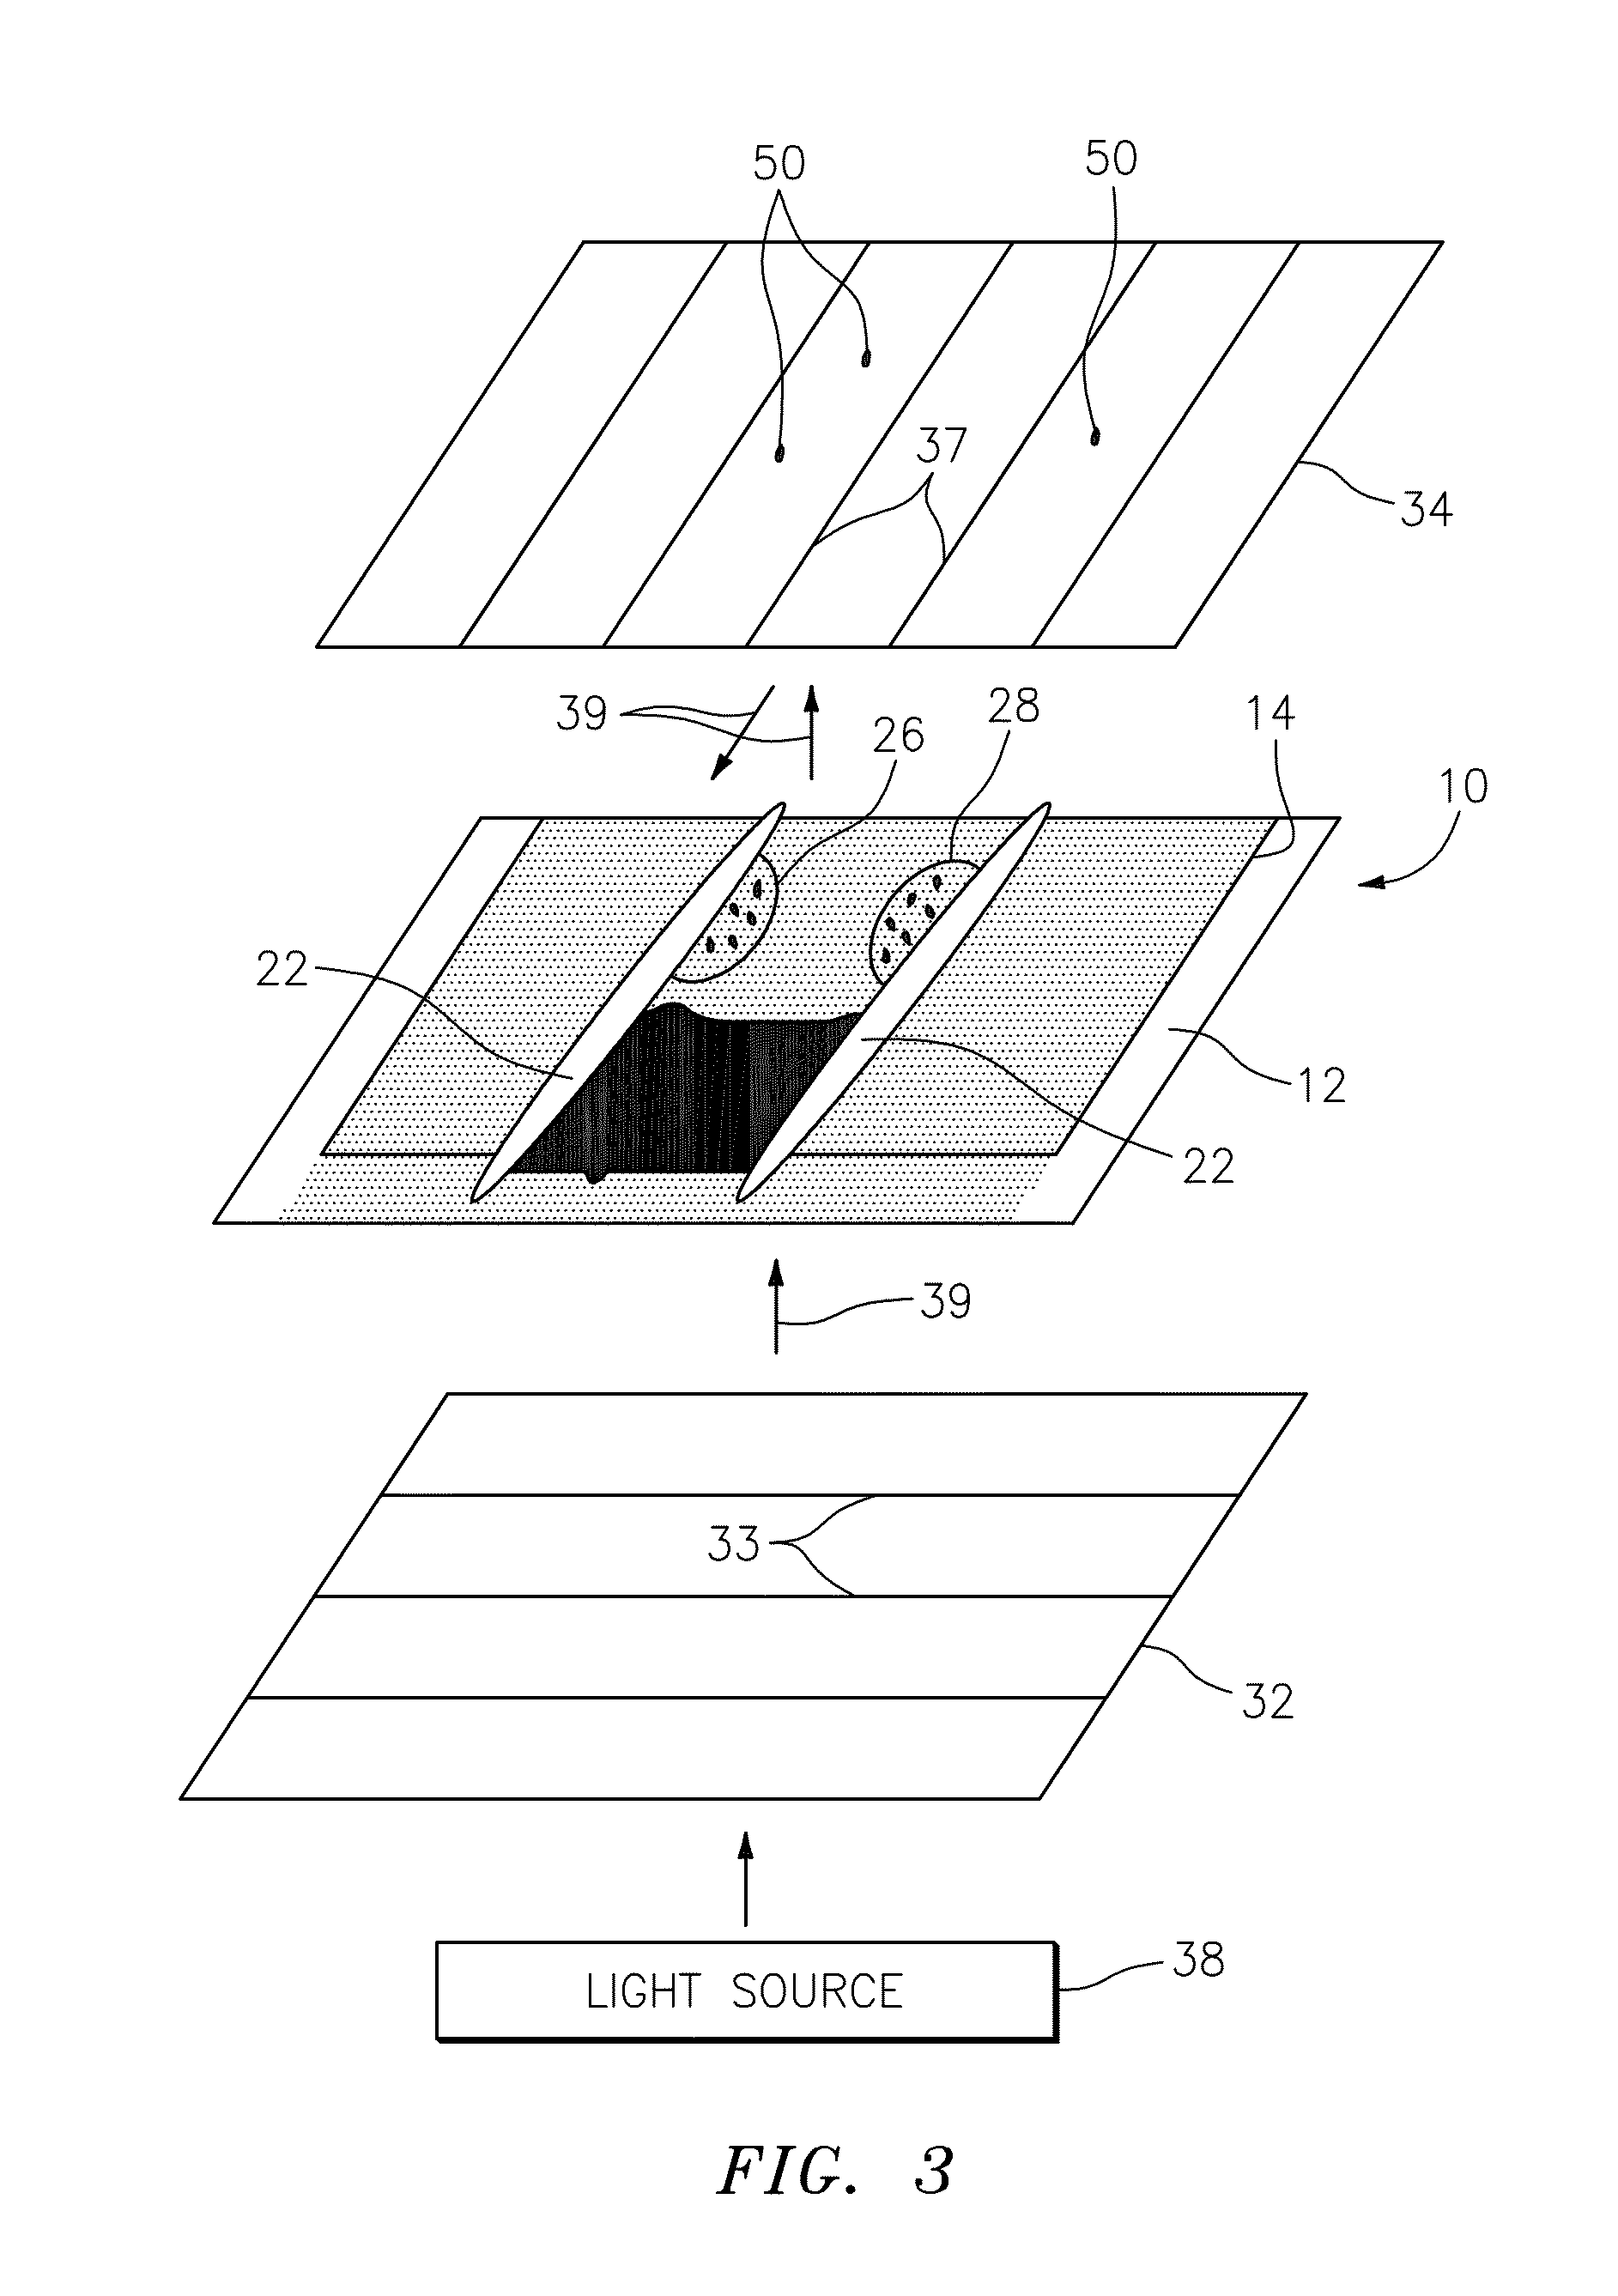 Method for detecting the presence of anisotropic crystals in undiluted whole blood